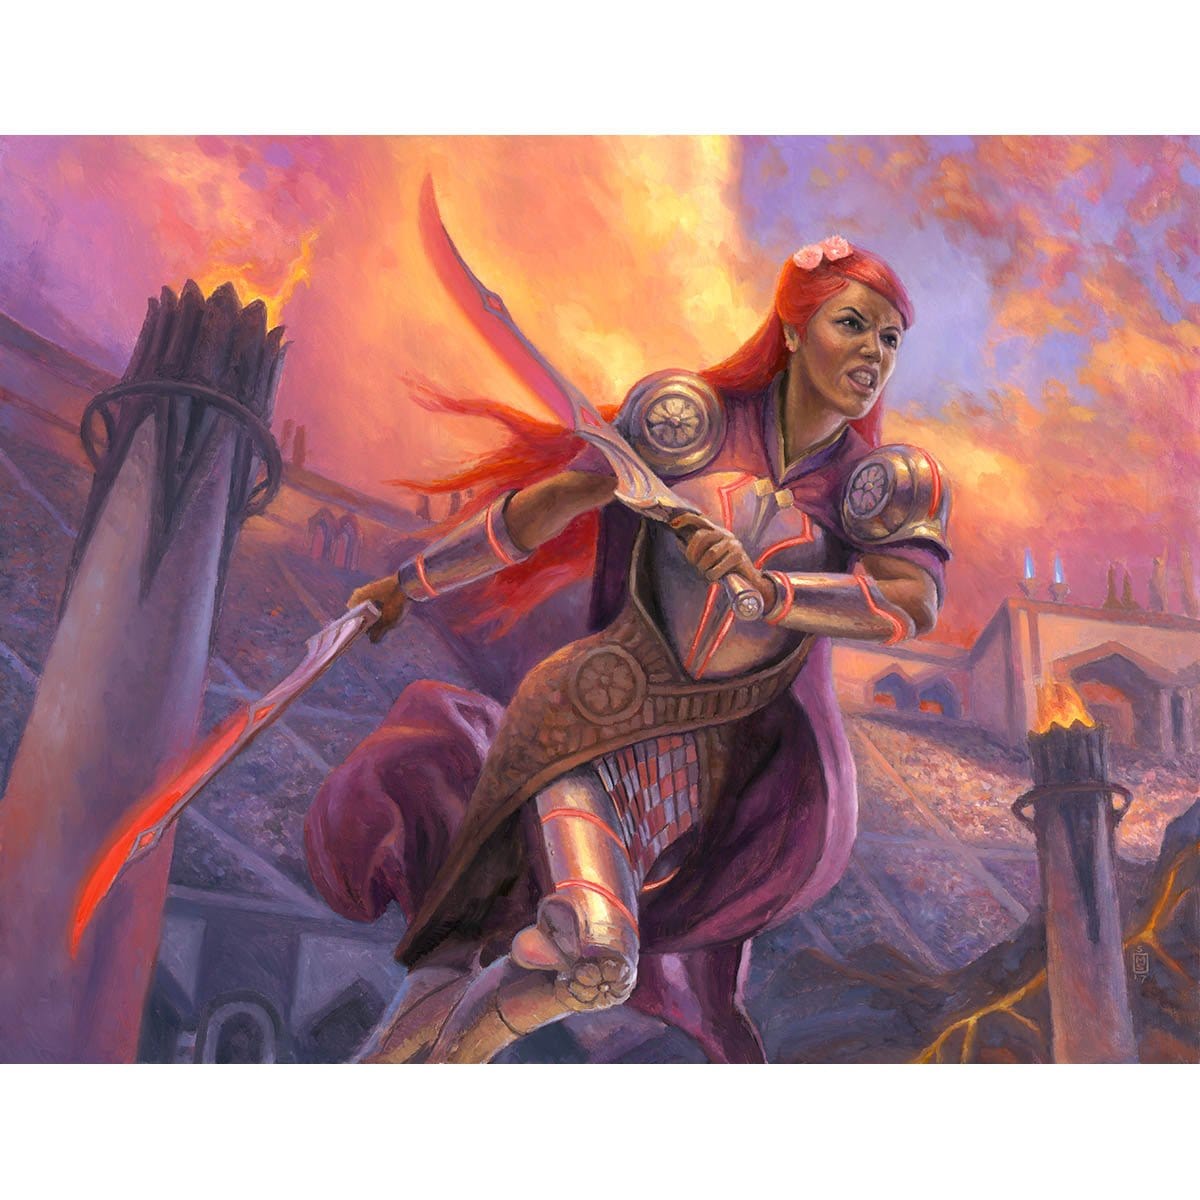 Najeela, the Blade-Blossom Print - Print - Original Magic Art - Accessories for Magic the Gathering and other card games